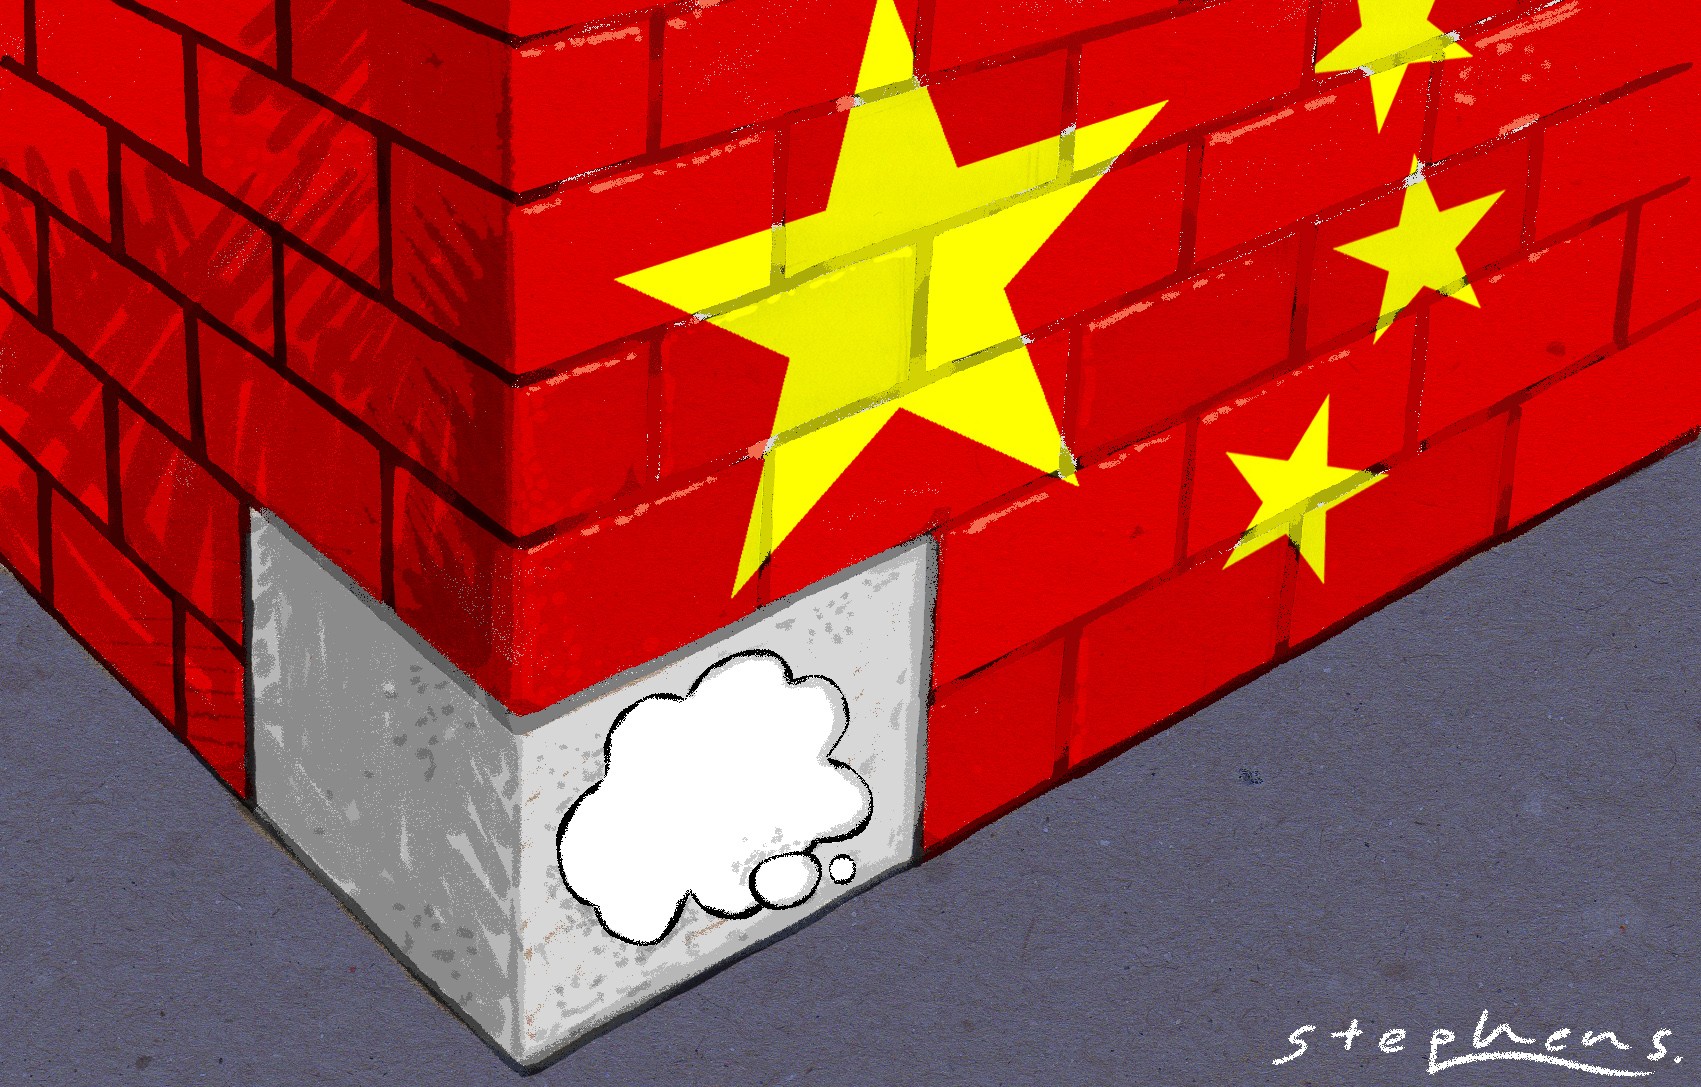 Both the Chinese and the American dreams inspire their people and give them the spiritual strength to build a strong nation. Illustration: Craig Stephens